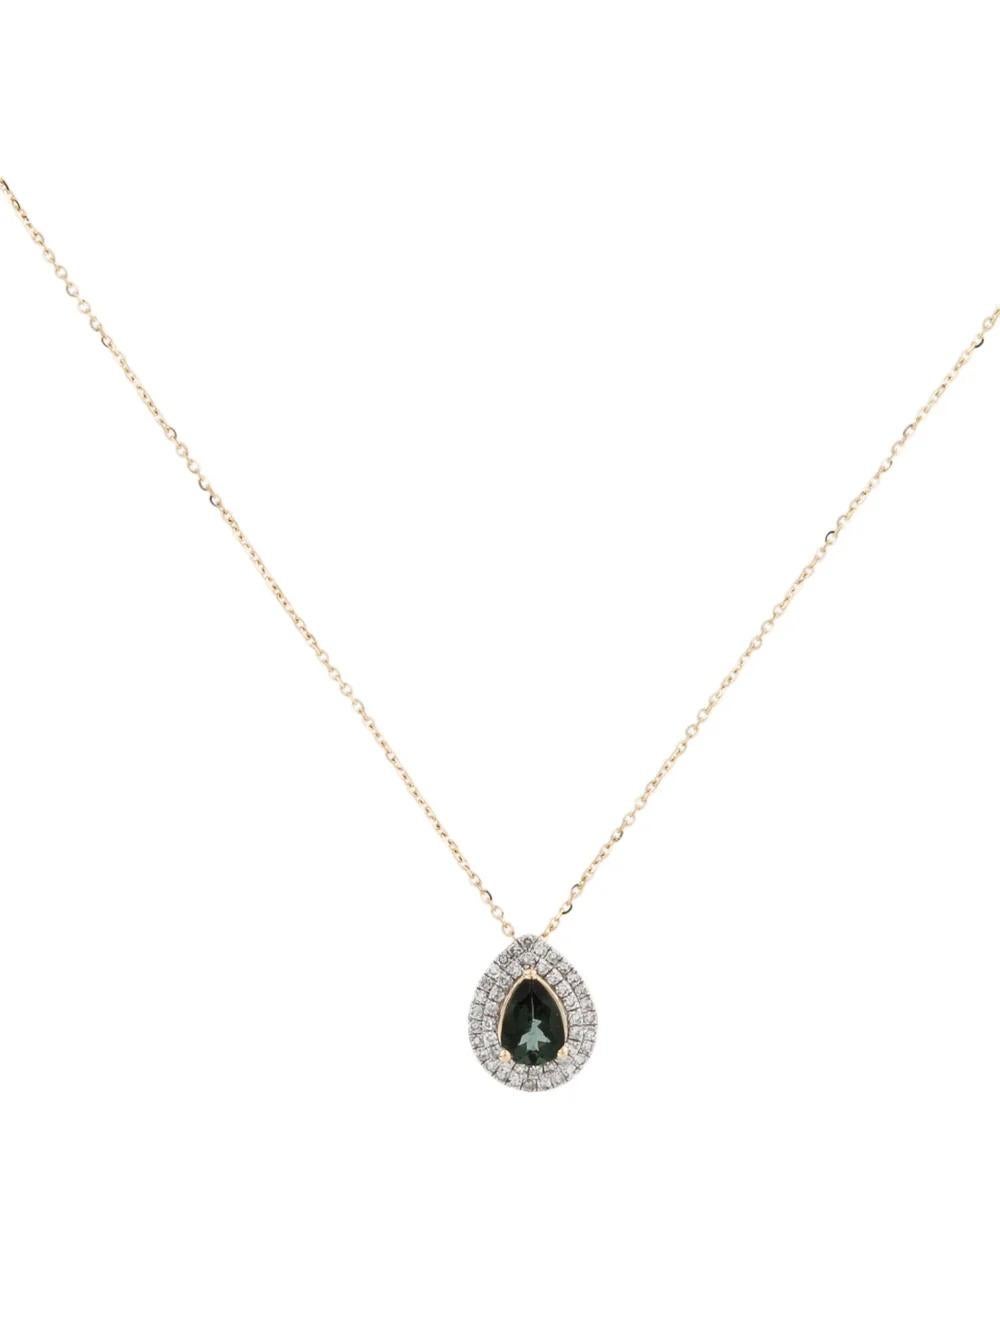 Elevate your style with this exquisite Rhodium-Plated & 14K Yellow Gold Pendant Necklace, featuring a captivating 0.53 Carat Pear Modified Brilliant Tourmaline and 0.25 Carats of shimmering Diamonds.

Specifications:

* Metal Type: 14K Yellow Gold,